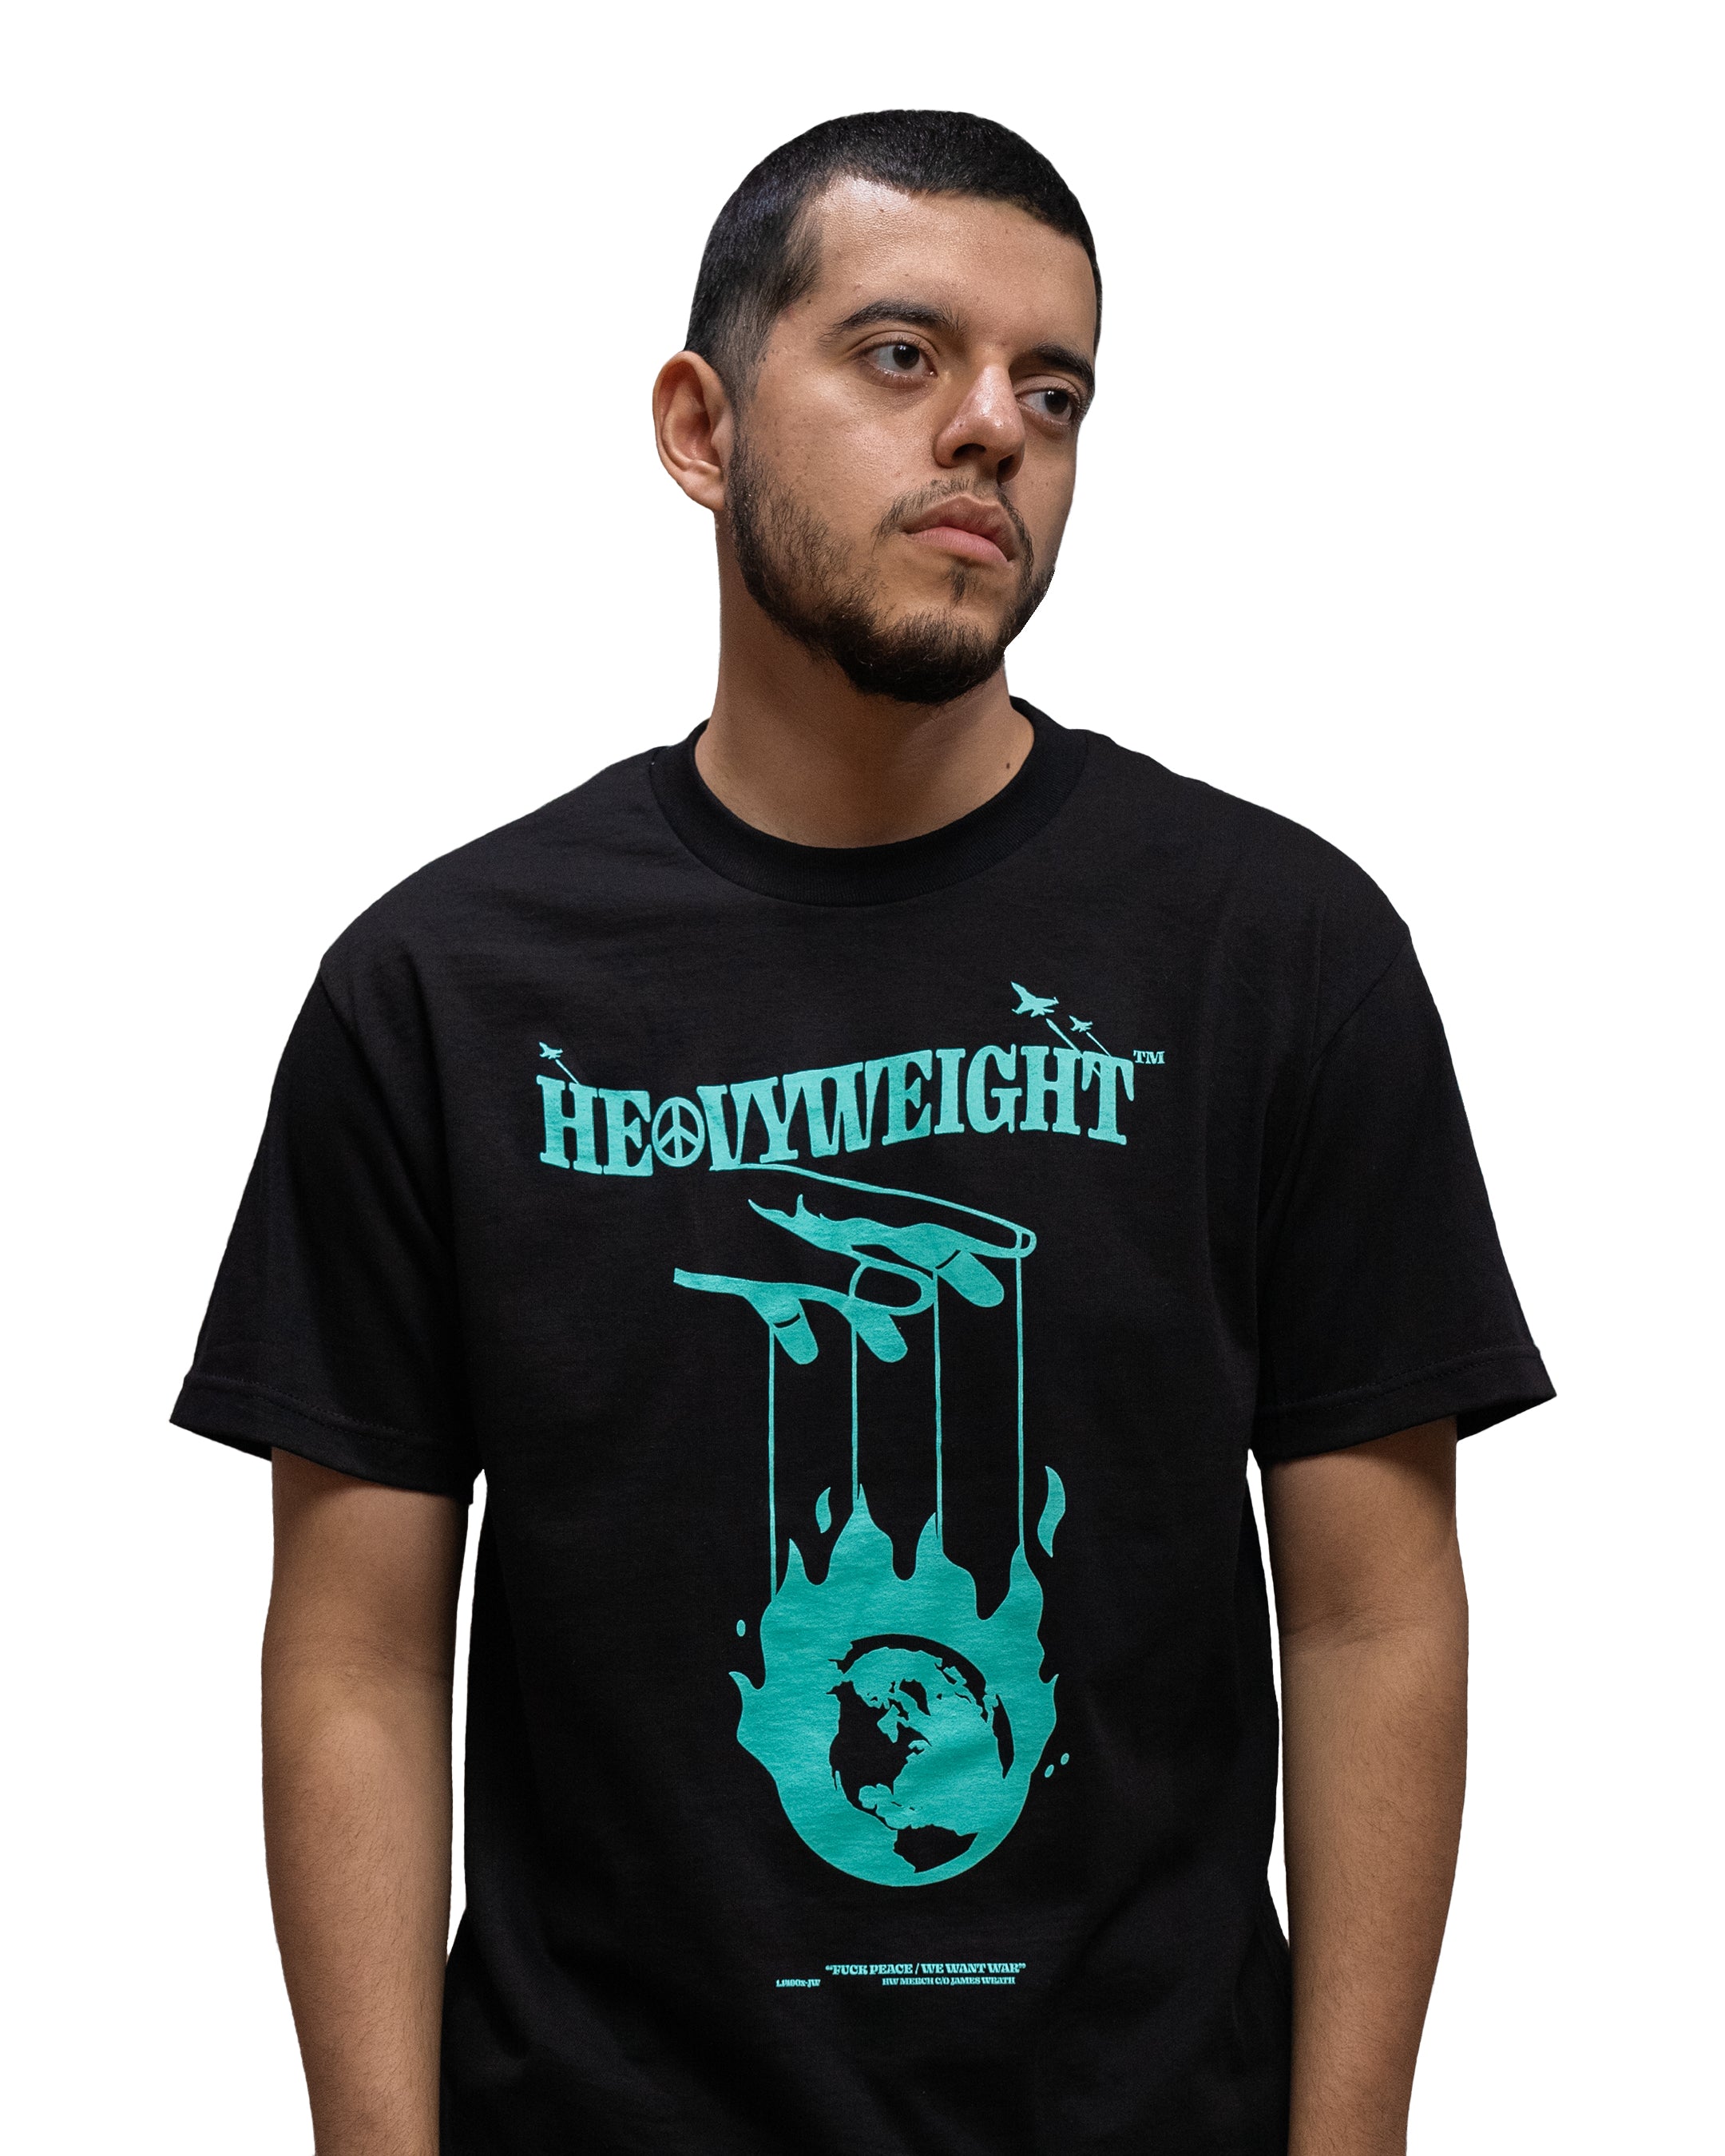 Heavyweight Records - World is Yours Shirt